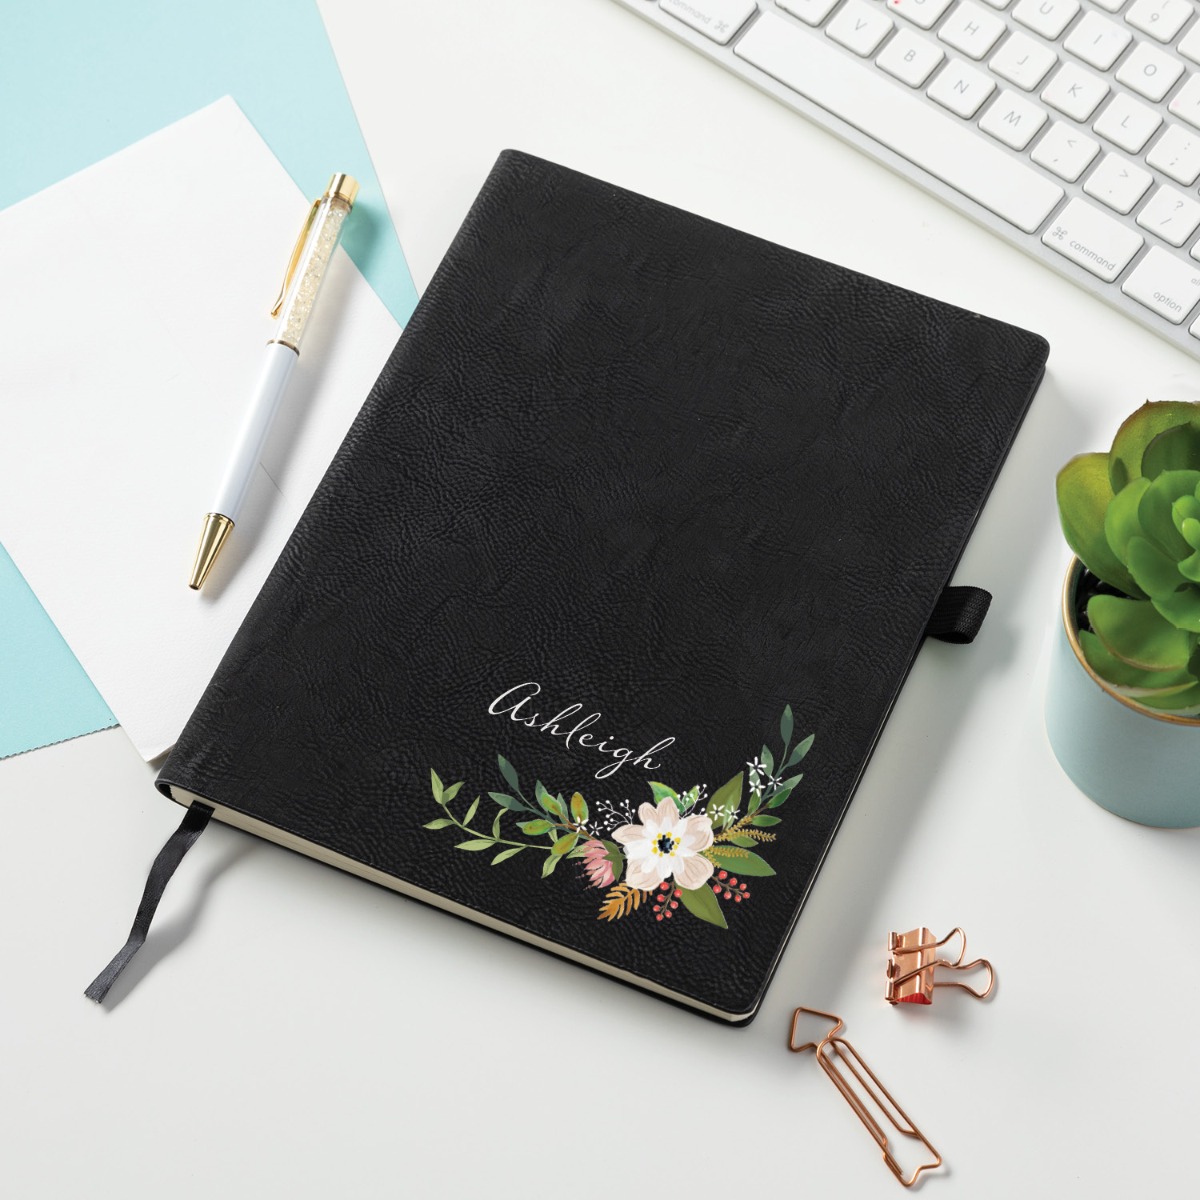 Floral with Name Personalized Black Notebook